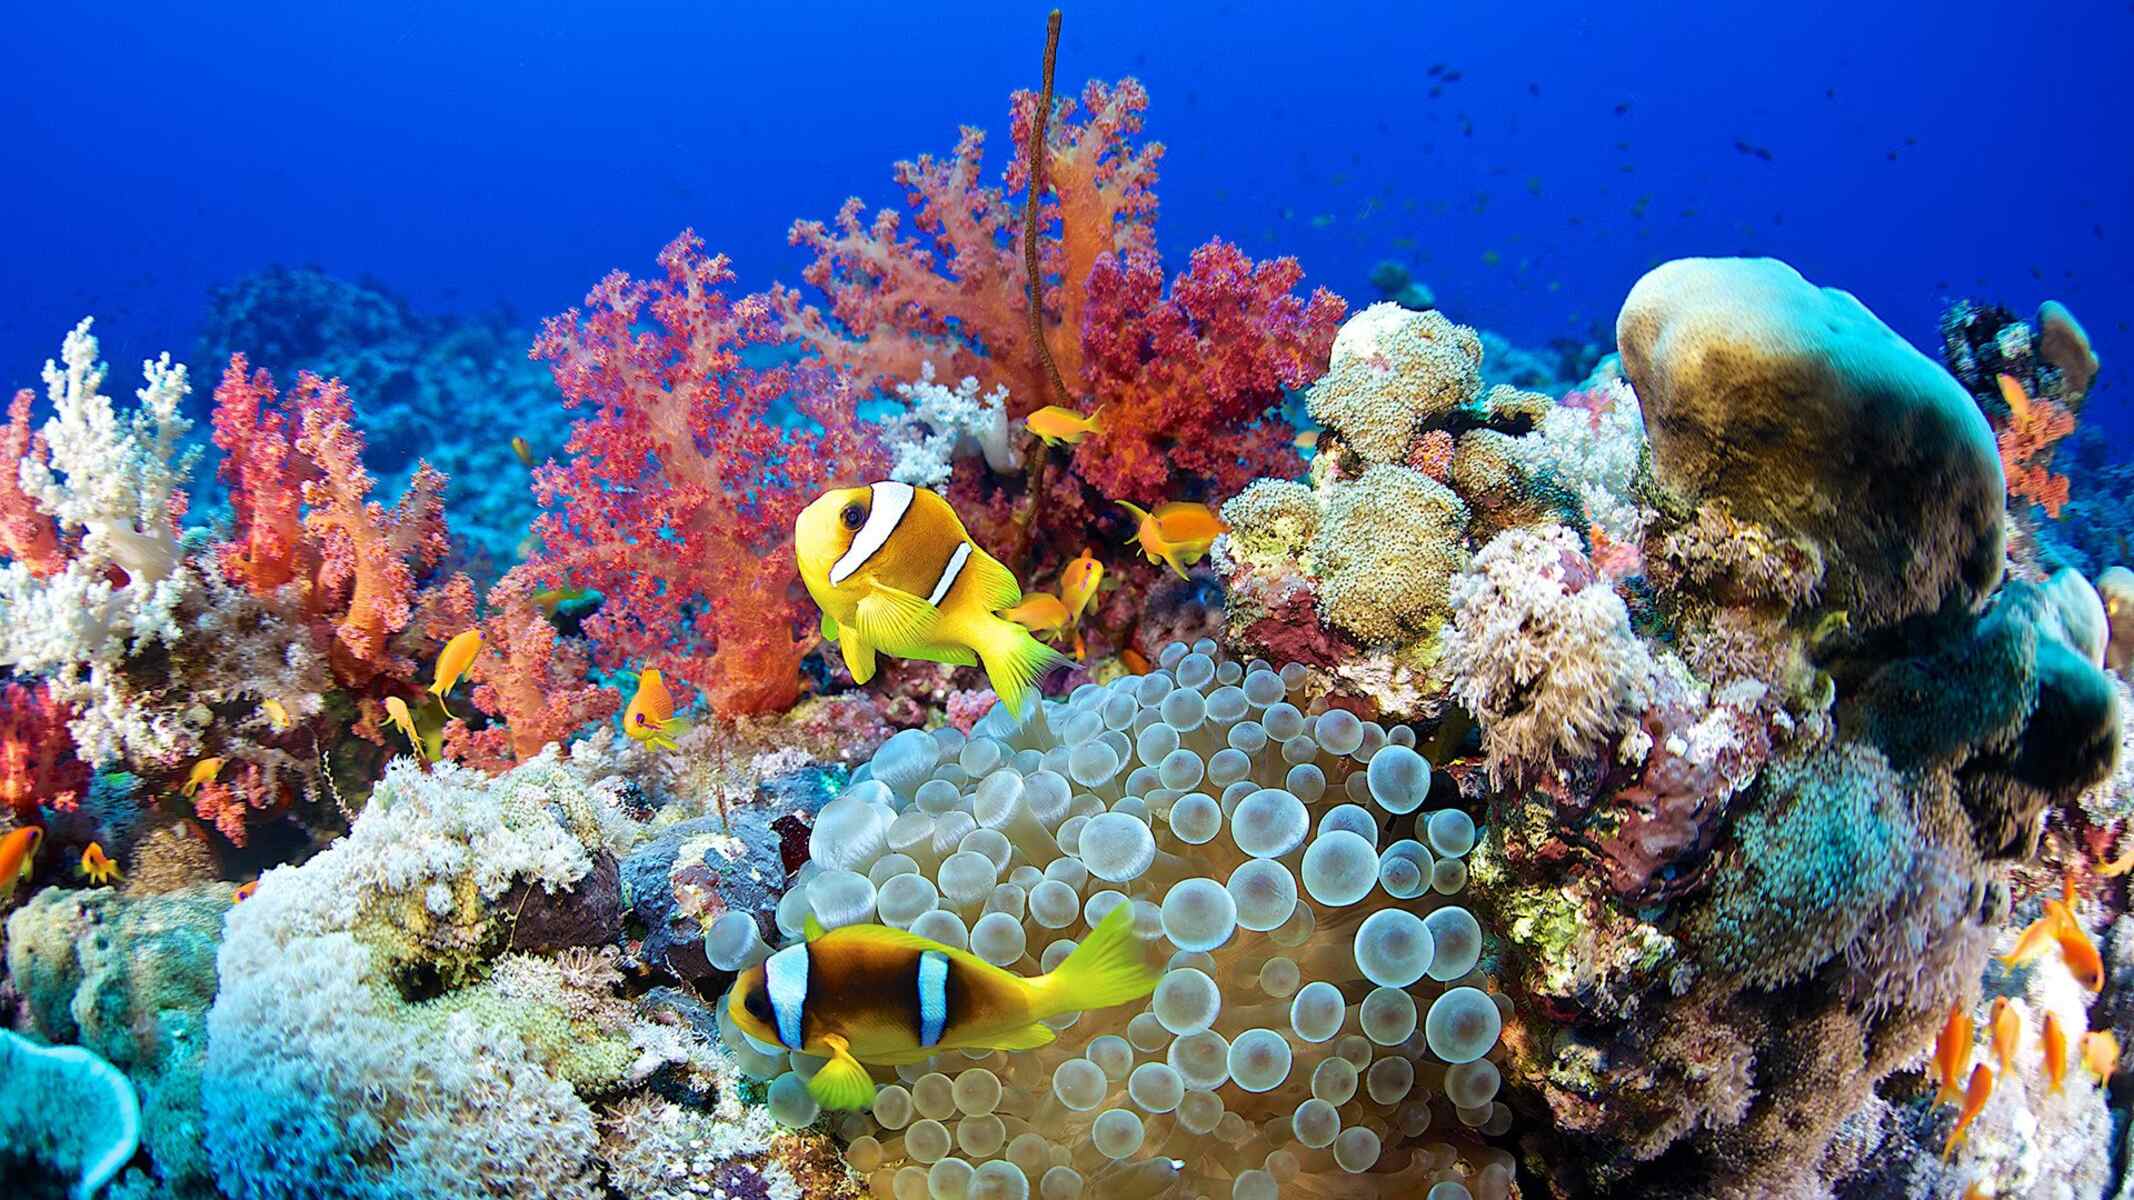 15-extraordinary-facts-about-bermuda-coral-reefs